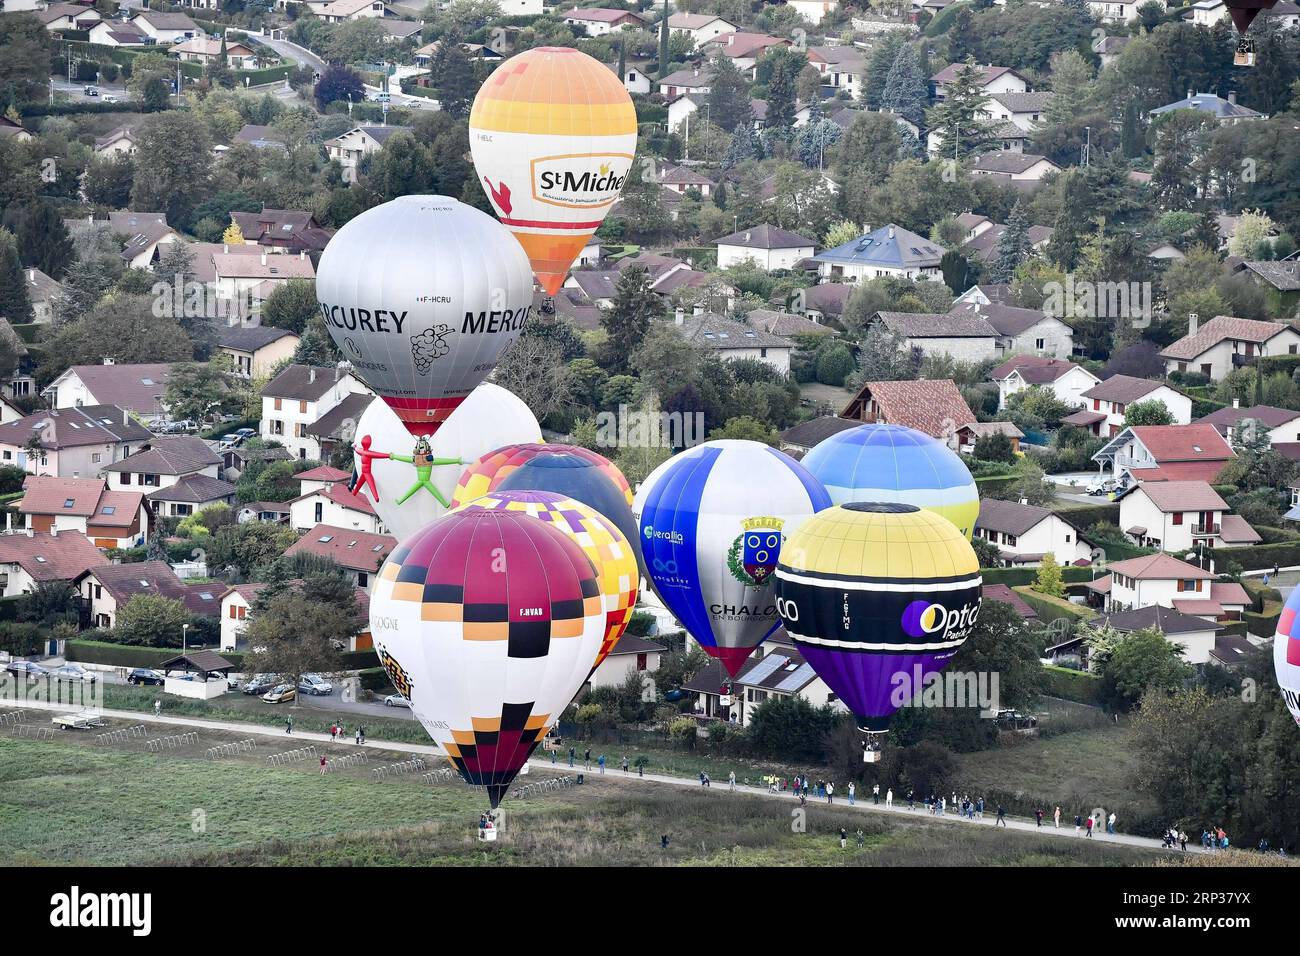 (180924) -- SAINT-HILAIRE, Sept. 24, 2018 (Xinhua) -- Photo taken on Sept. 23, 2018 shows hot air balloons flying over Saint-Hilaire, France. The four-day air sports festival, Coupe Icare, concluded on Sunday. On its 45th edition, the Coupe Icare this year attracted about 700 accredited pilots and over 90,000 spectators. (Xinhua/Chen Yichen) (SP)FRANCE-SAINT-HILAIRE-AIR SPORTS-45TH COUPE ICARE PUBLICATIONxNOTxINxCHN Stock Photo